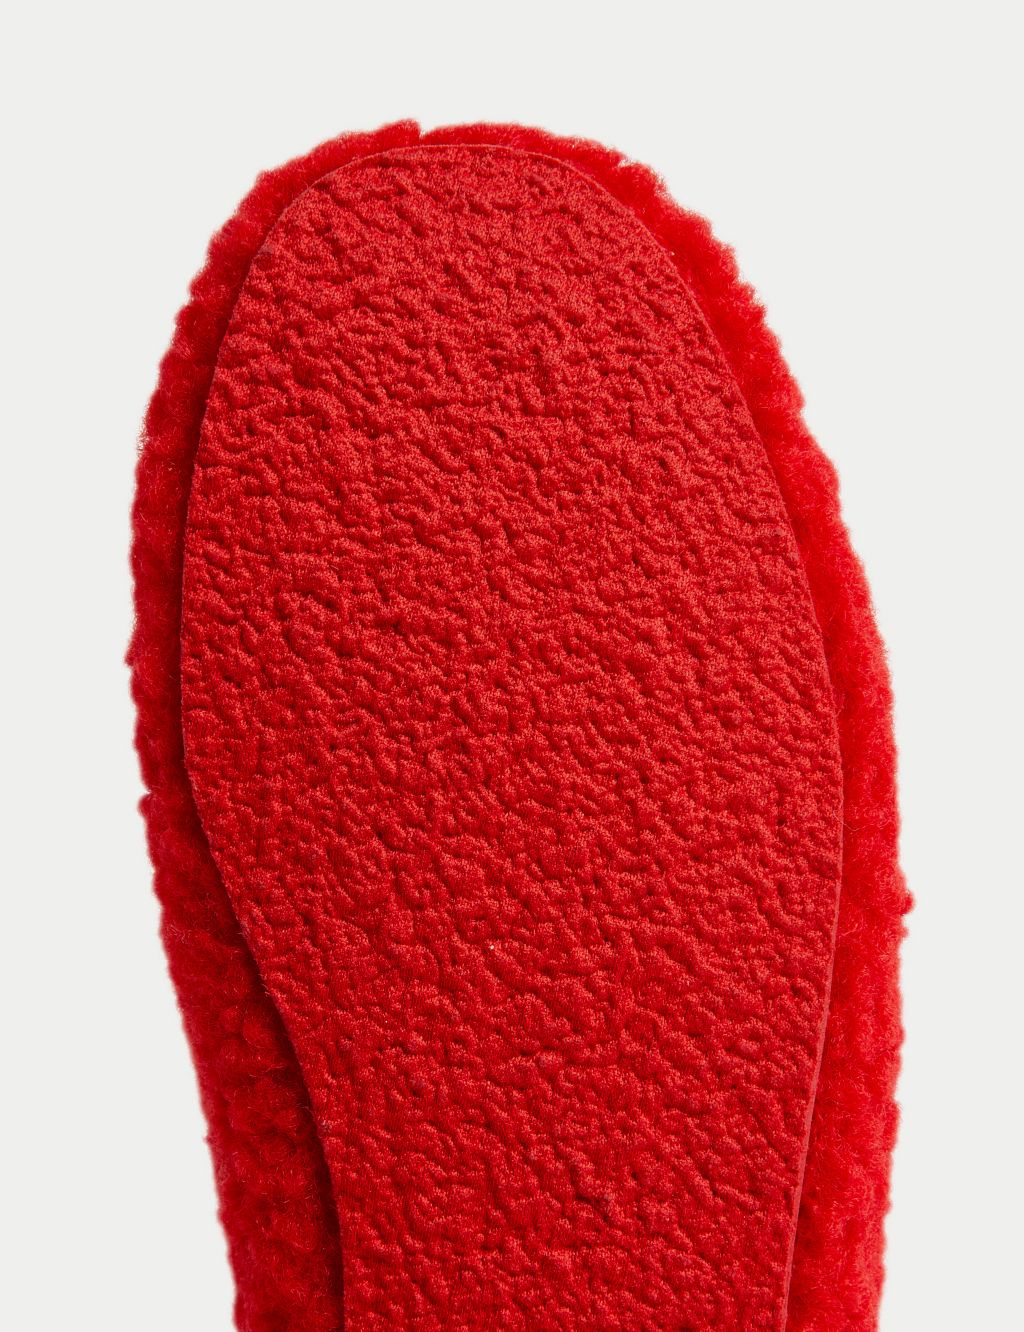 Kids' Love Slippers (4 Small - 6 Large) image 4